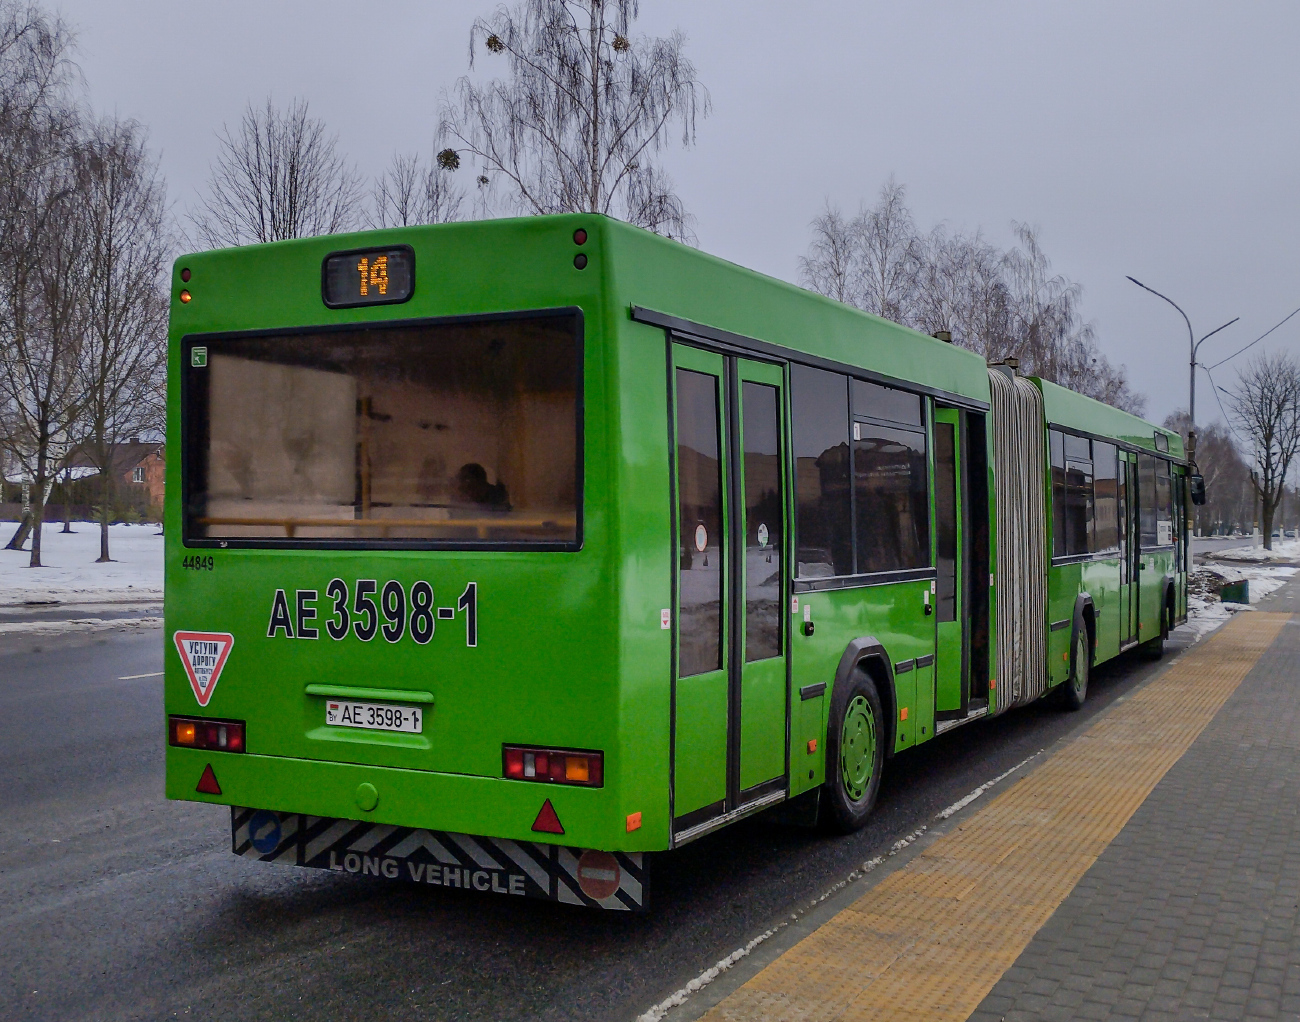 Pinsk, МАЗ-105.465 # 44849